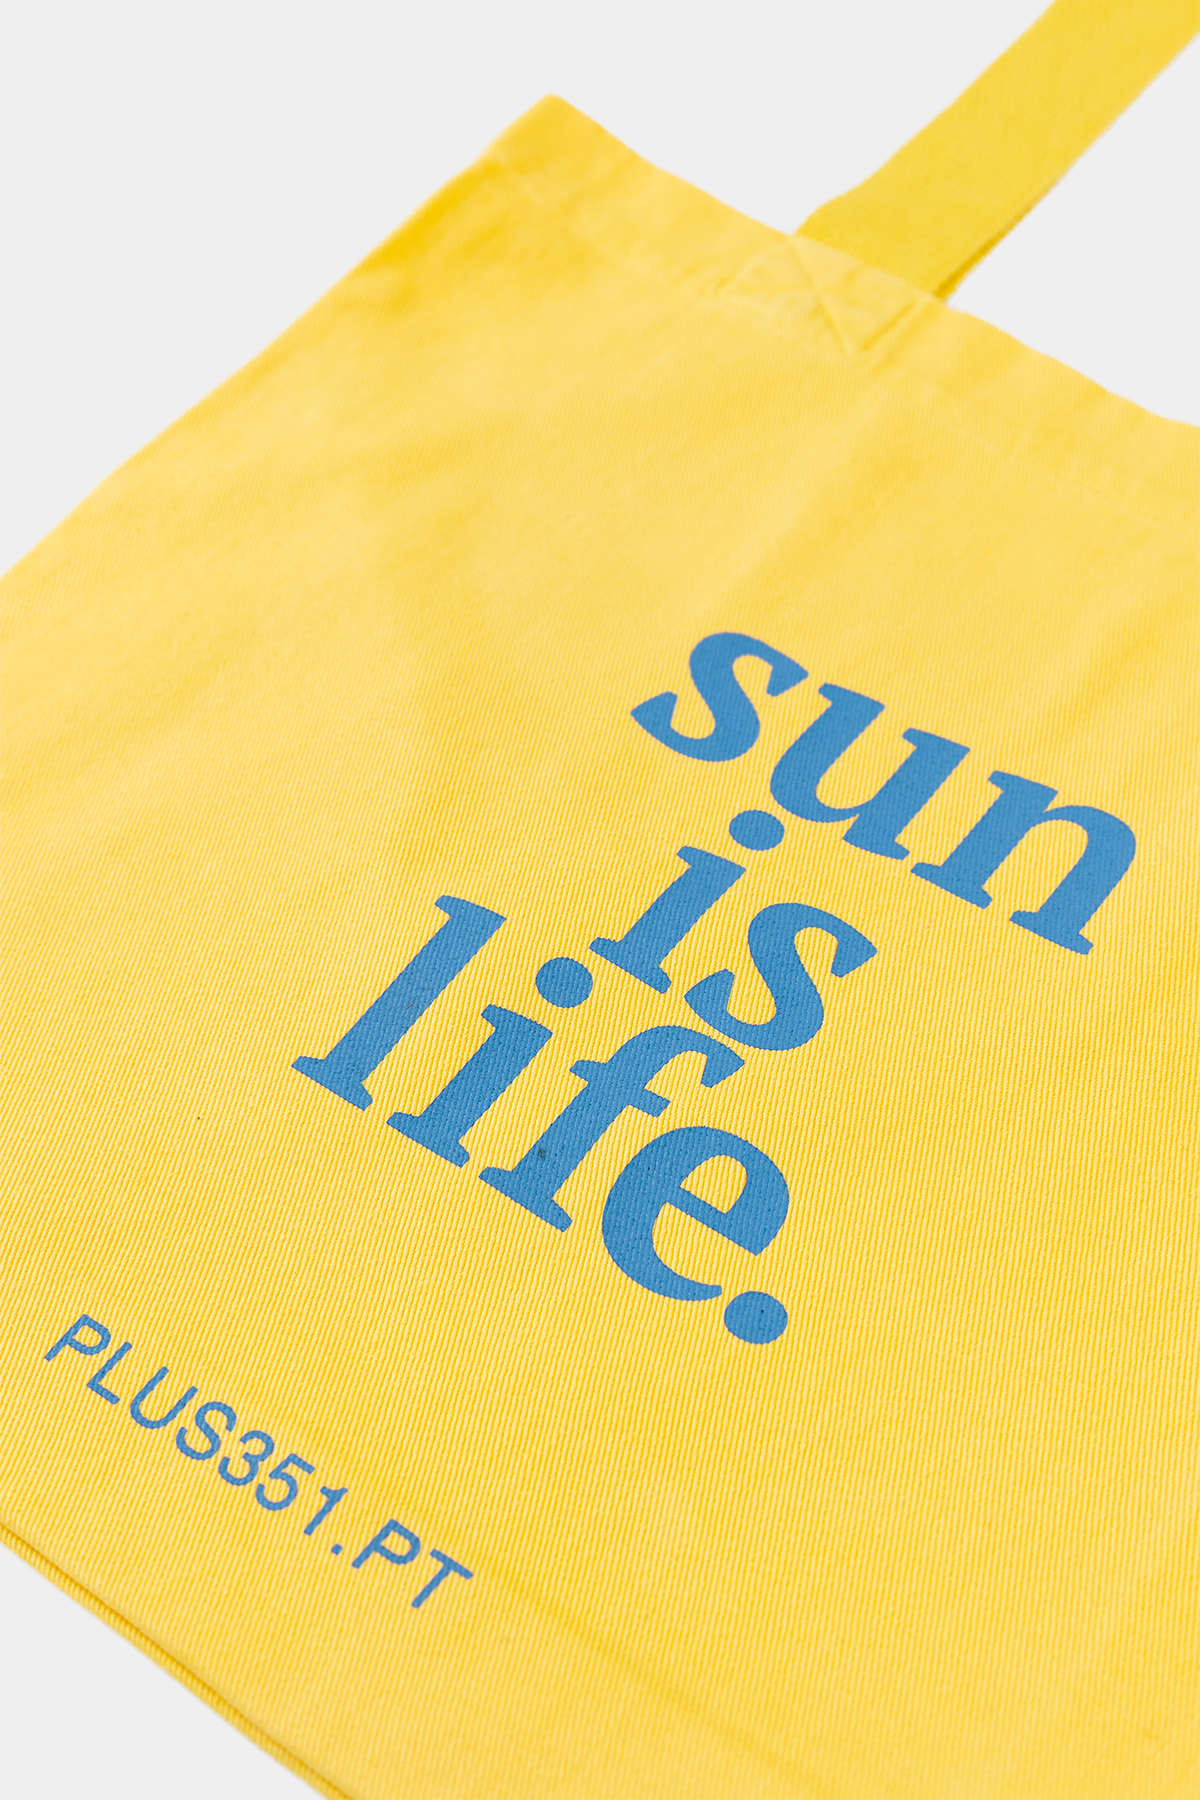 SUN IS LIFE PALE YELLOW TOTE-BAG